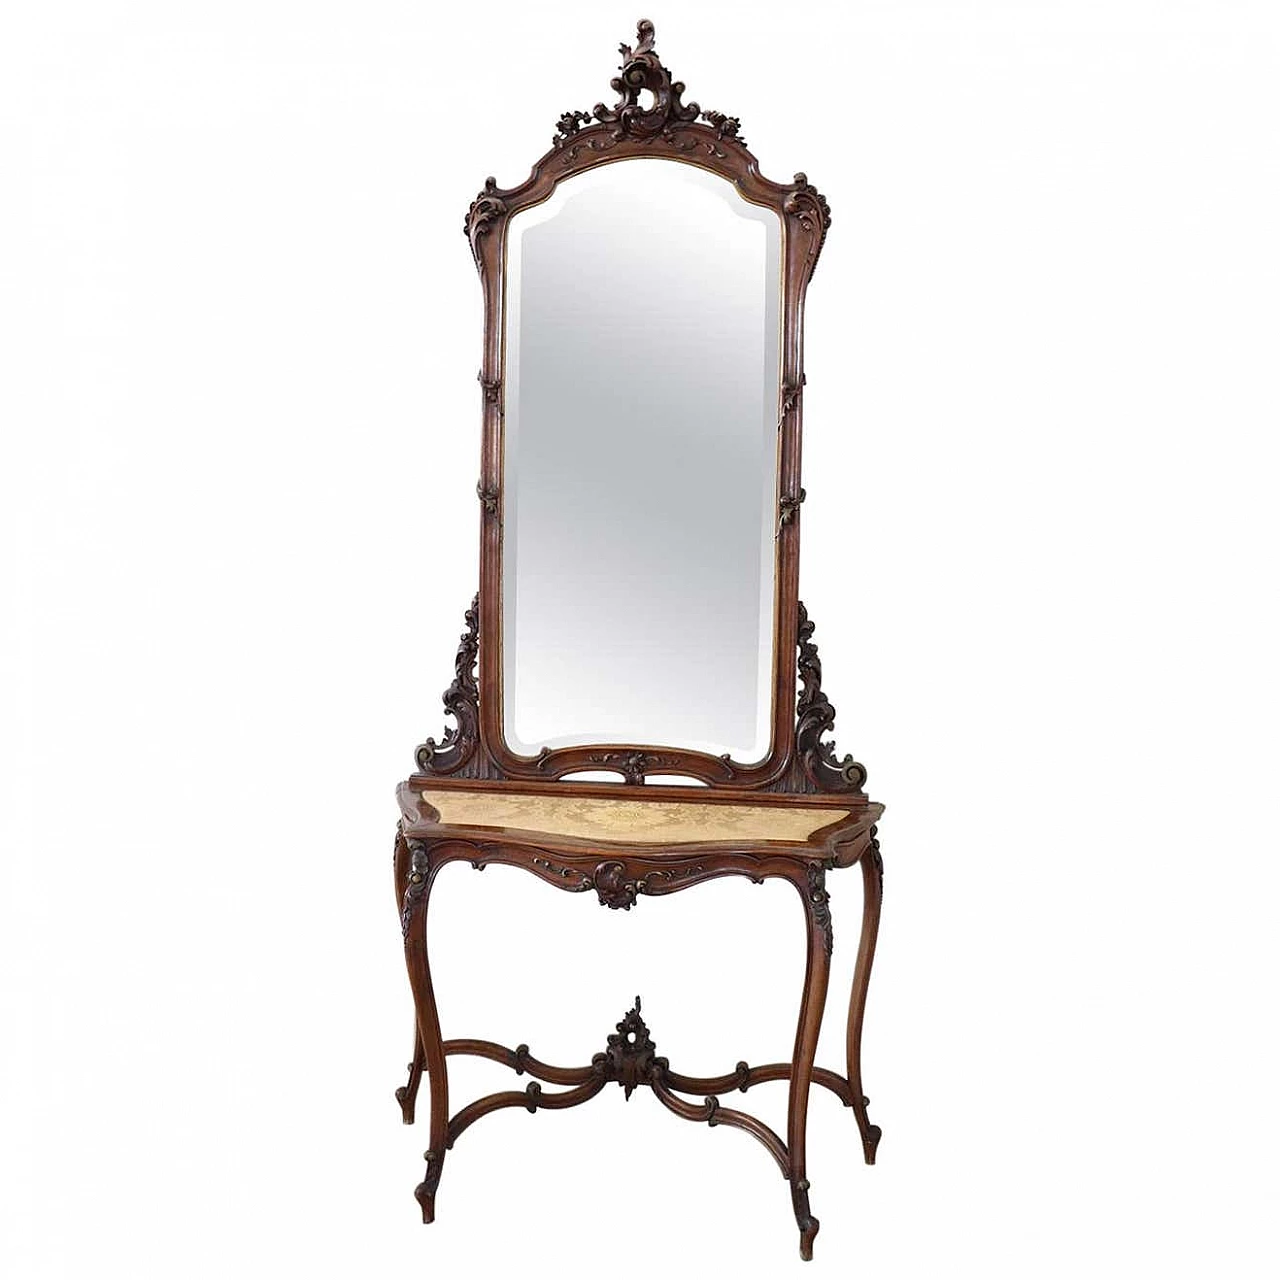 Carved walnut console table with mirror, late 19th century 1303612